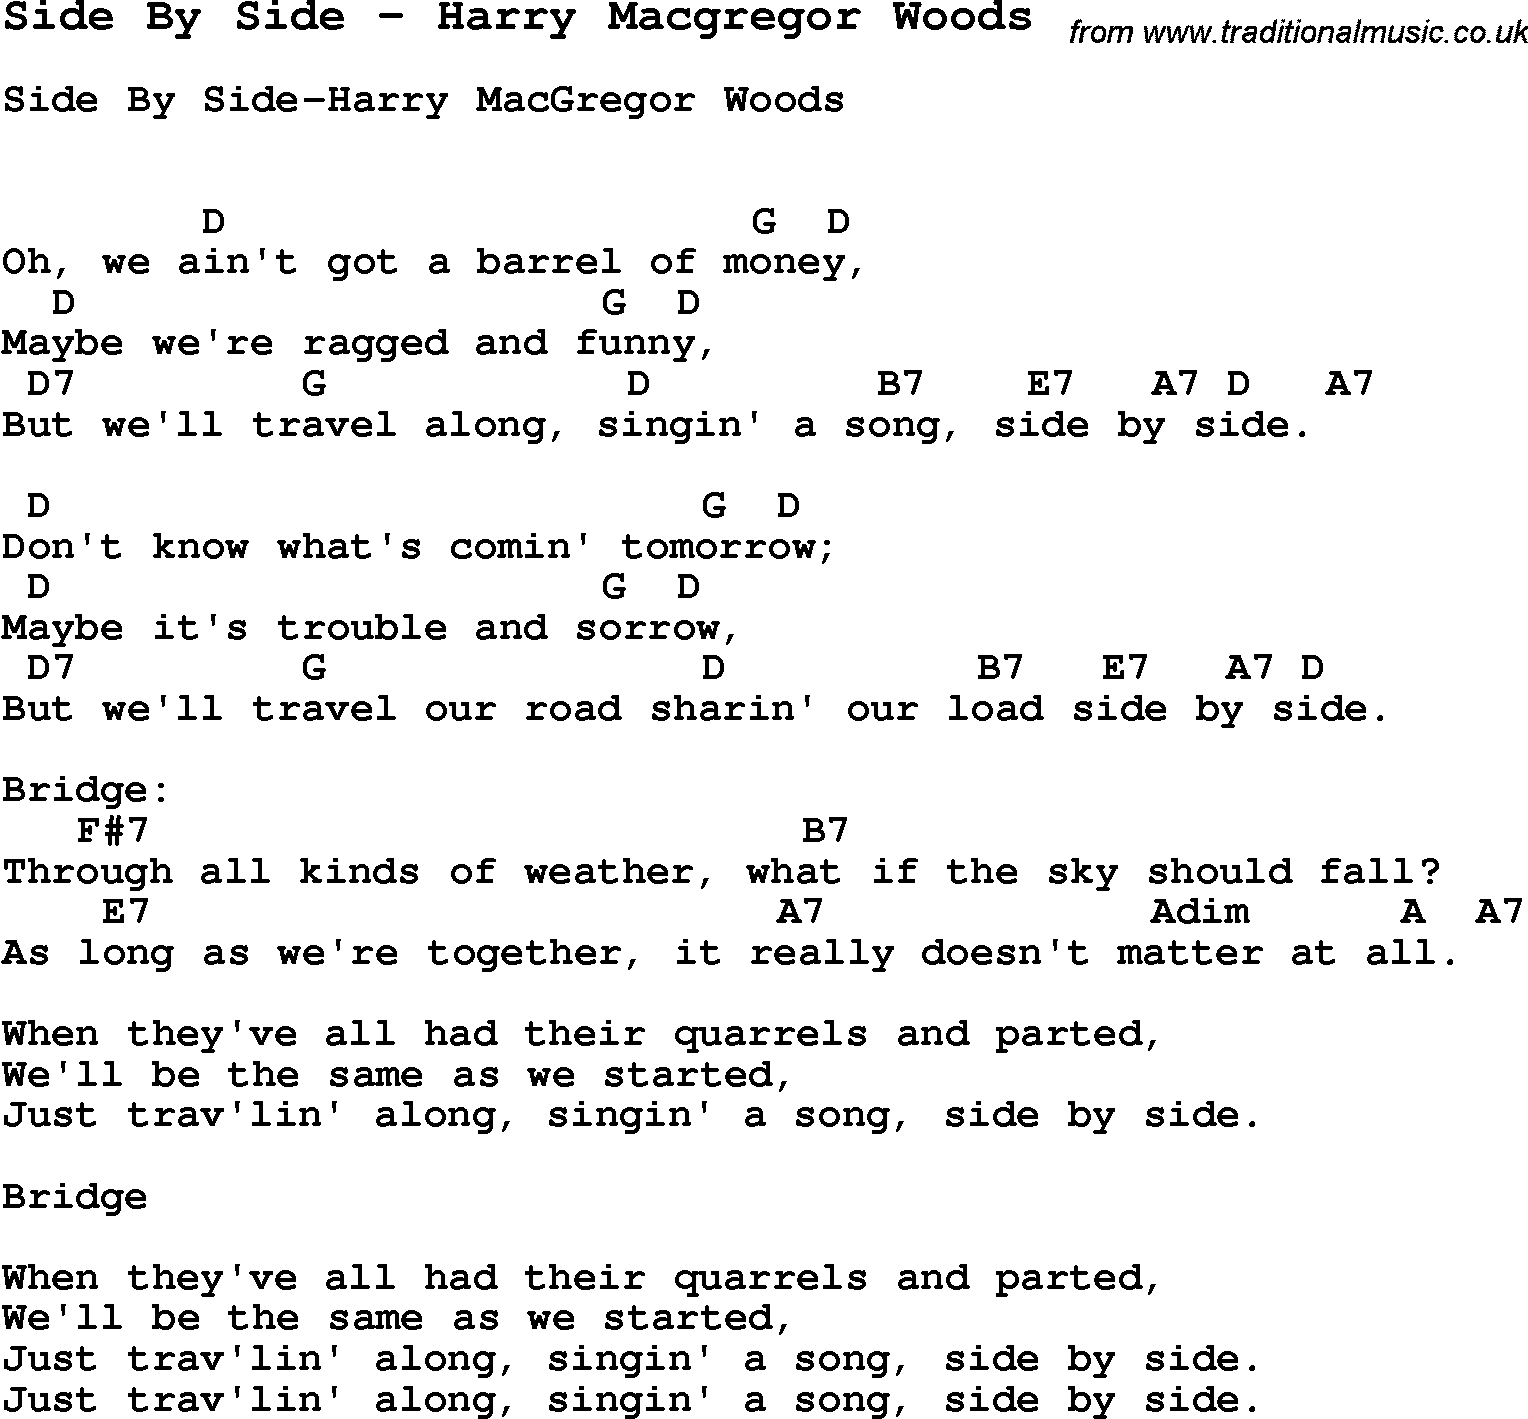 Song Side By Side by Harry Macgregor Woods, with lyrics for vocal performance and accompaniment chords for Ukulele, Guitar Banjo etc.